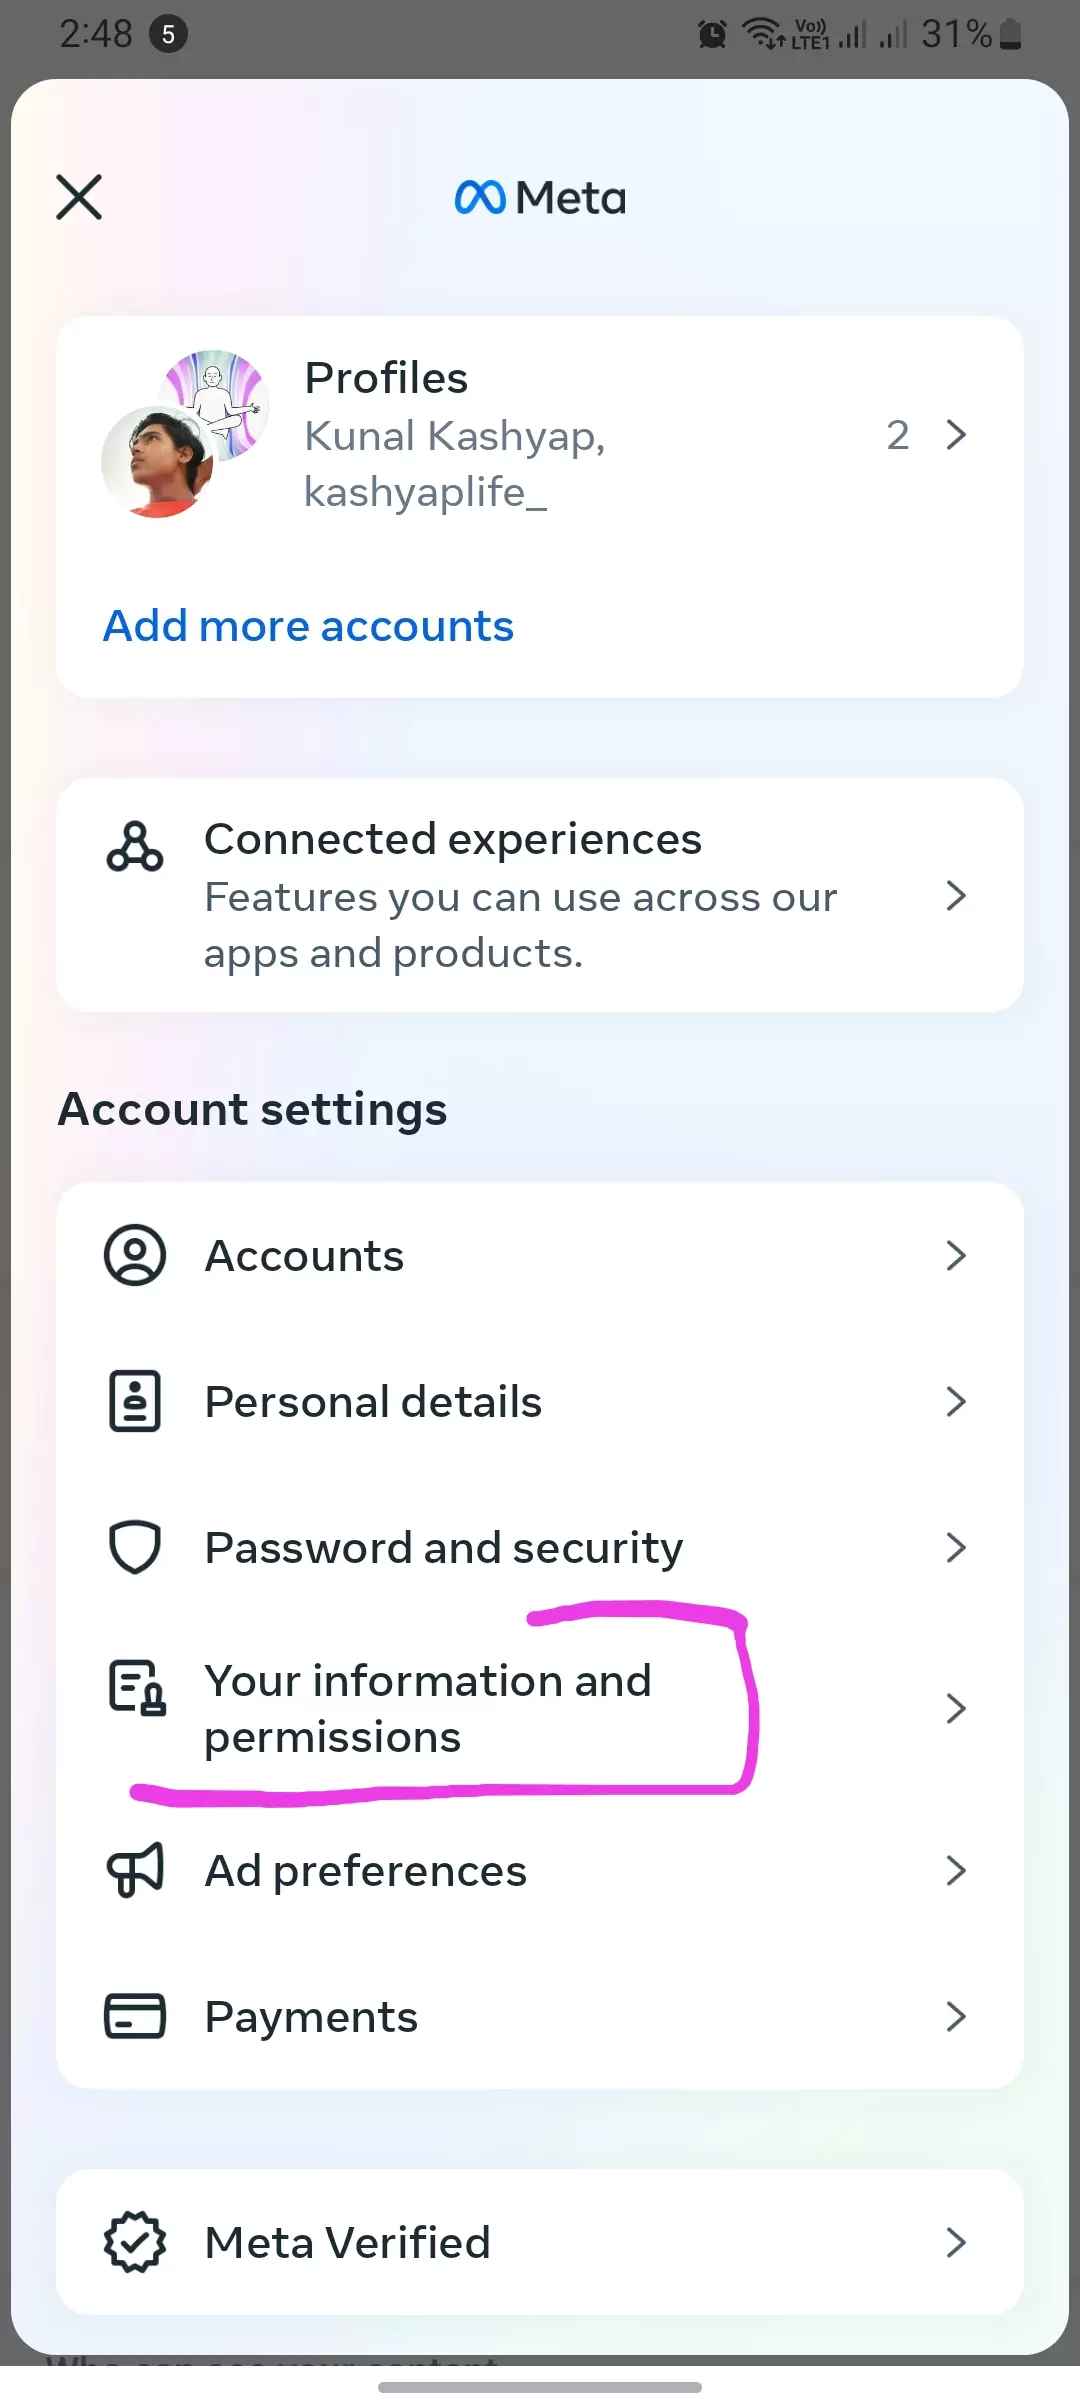 your information and permission in account center